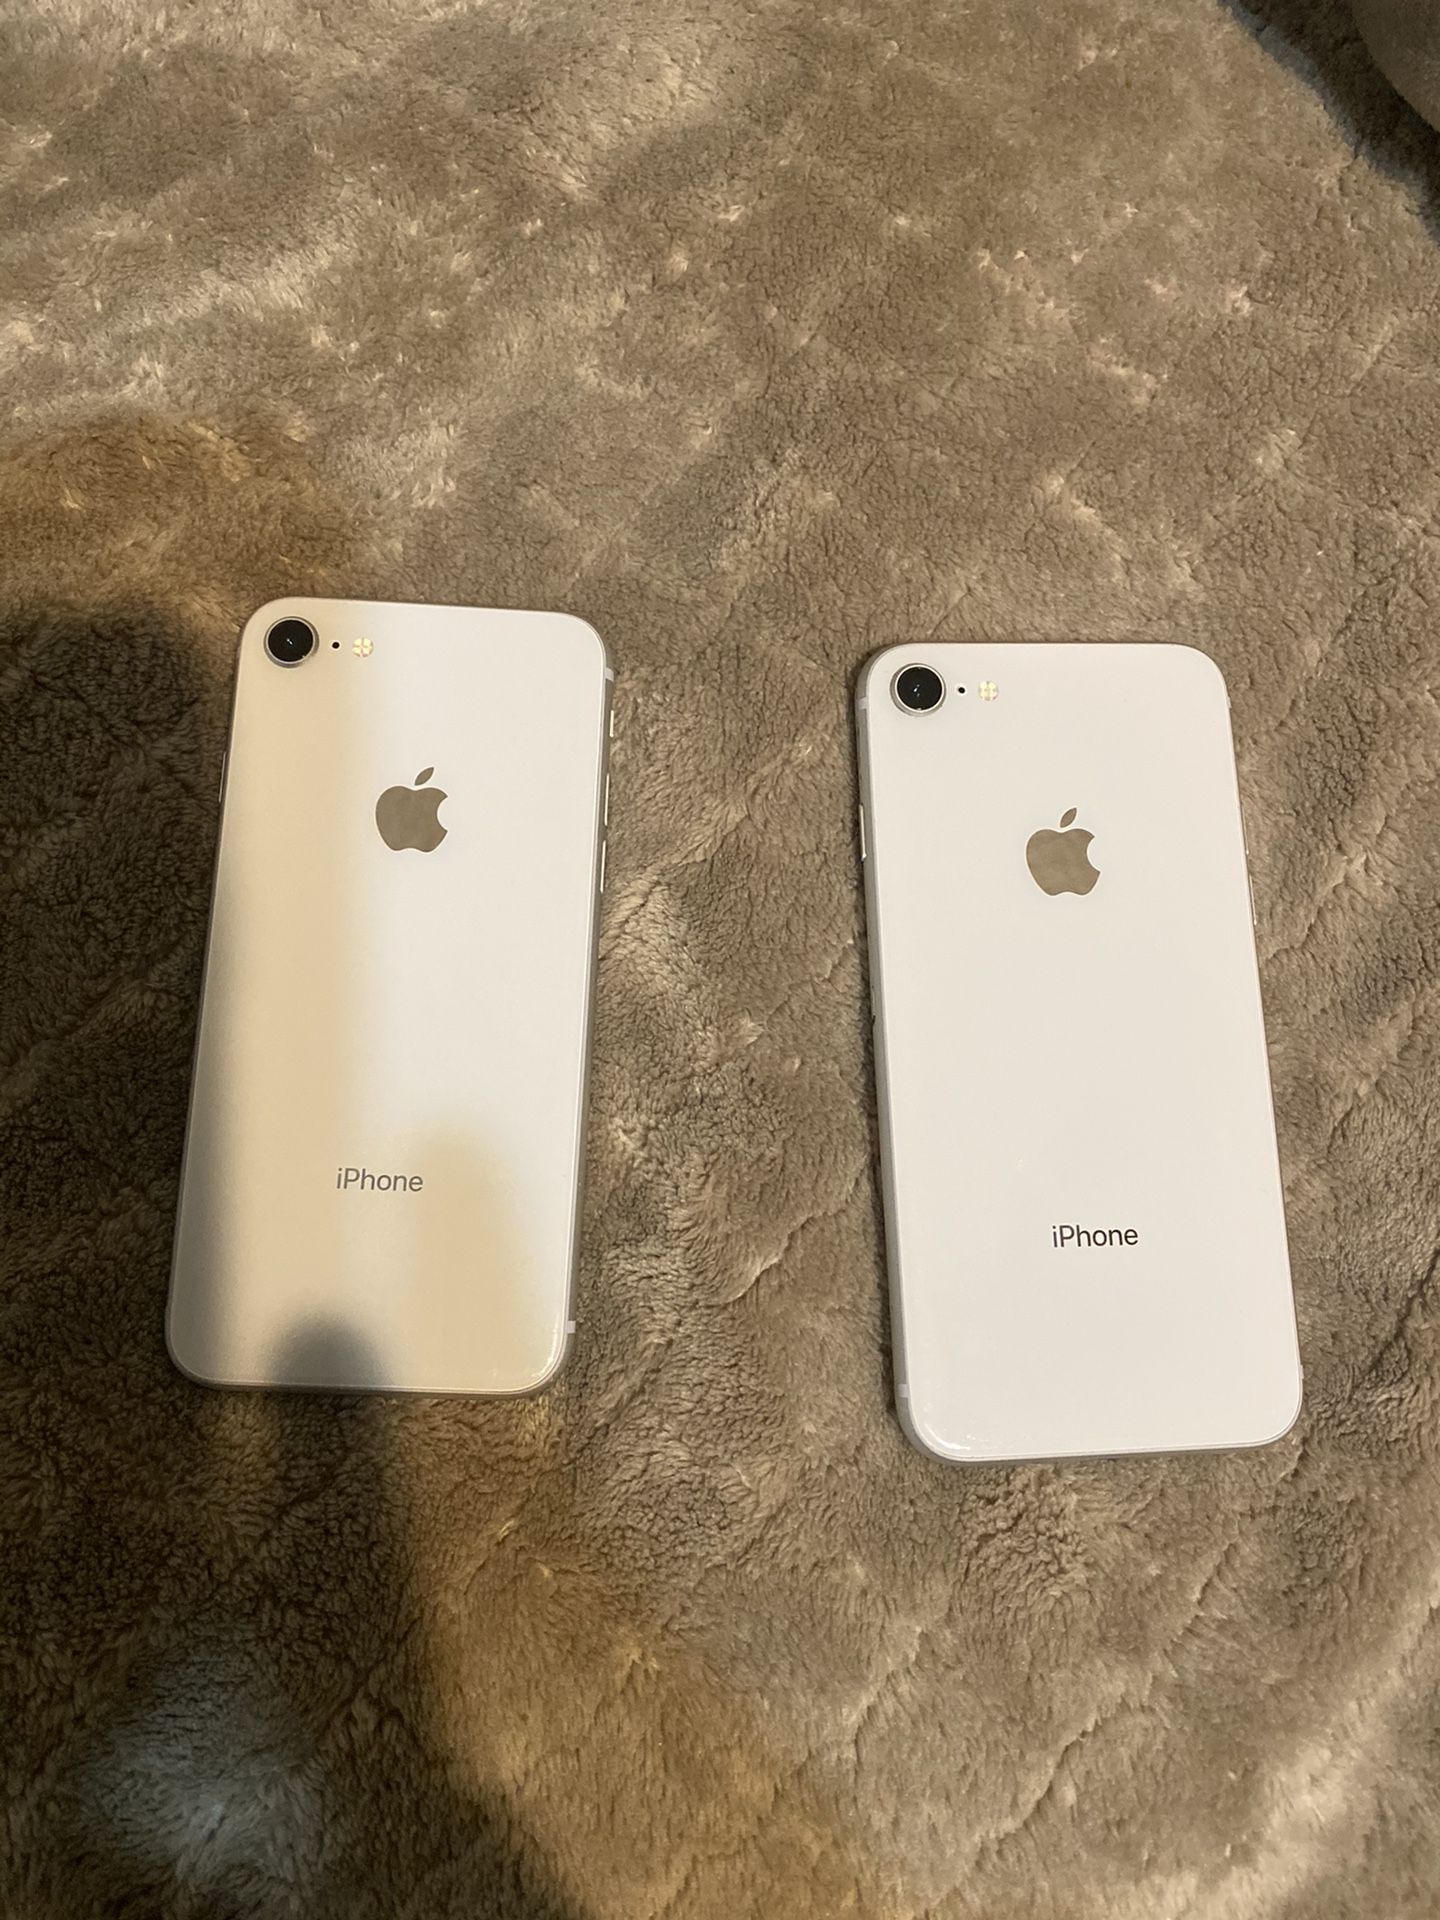 I have two iPhone 8’s for sale 64 gb one is unlock to any carrier the other one is for cricket only ready to activate no scratches at all like new 5